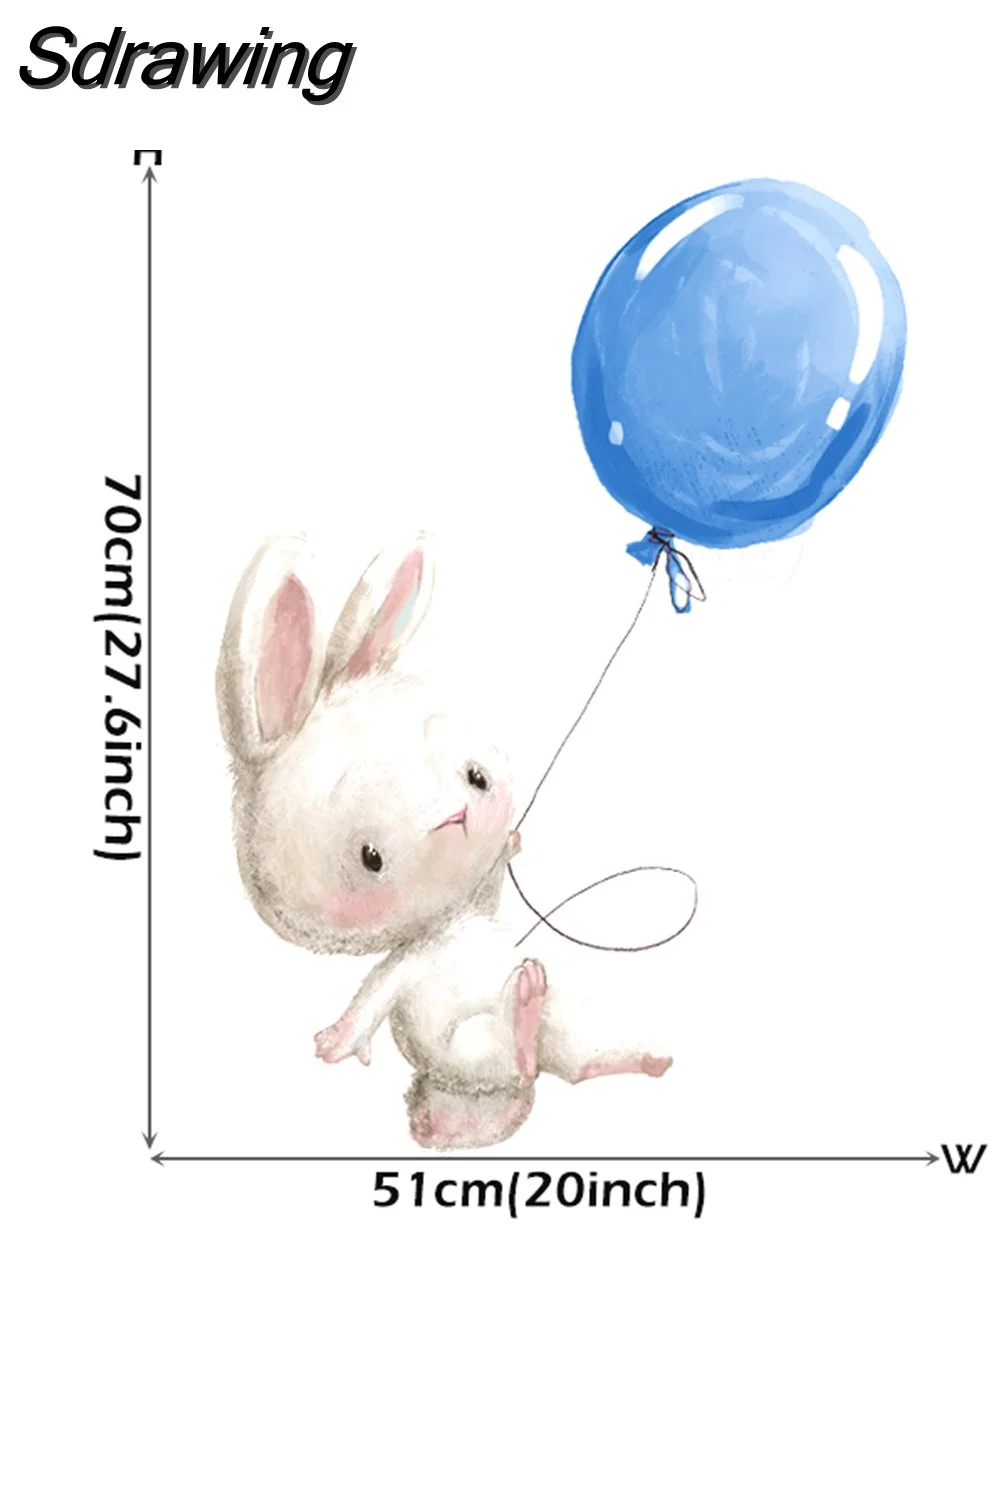 Sdrawing Color Boy Bunny with Air Balloons Wall Stickers for Kids Room Boy's Bedroom Decoration Wall Decals Watercolor Stars Cloud